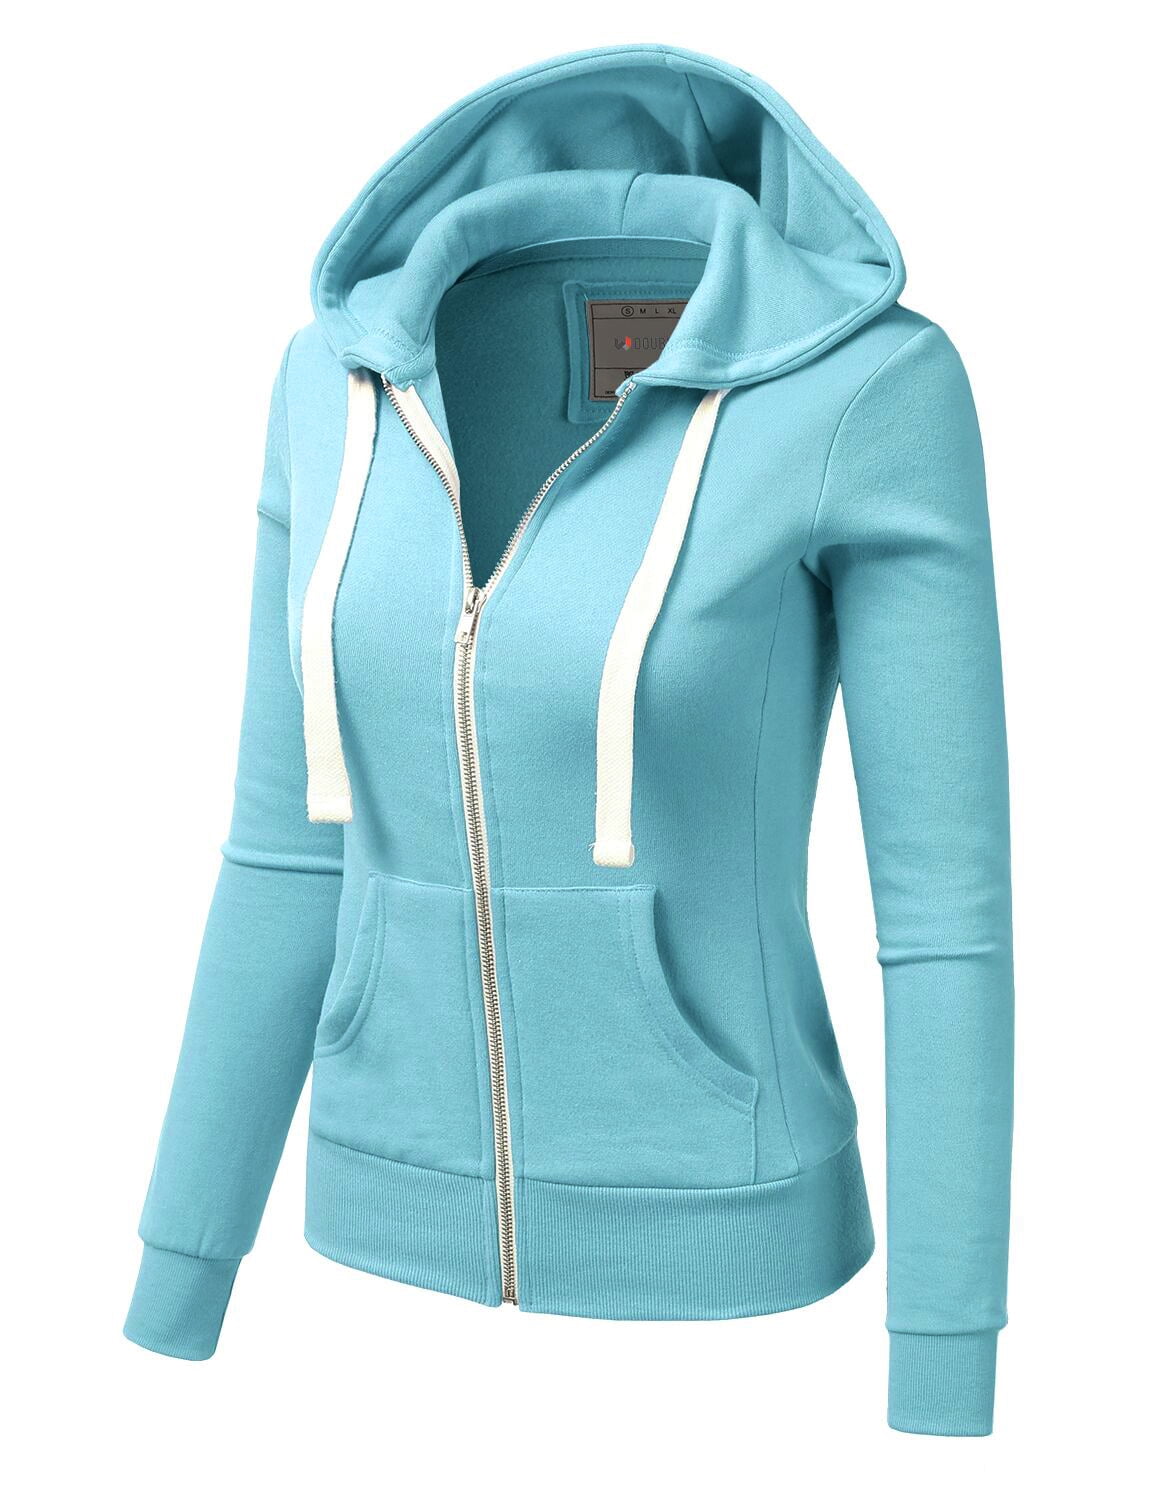 Doublju Lightweight Thin Zip-Up Hoodie Jacket for Women with Plus Size 